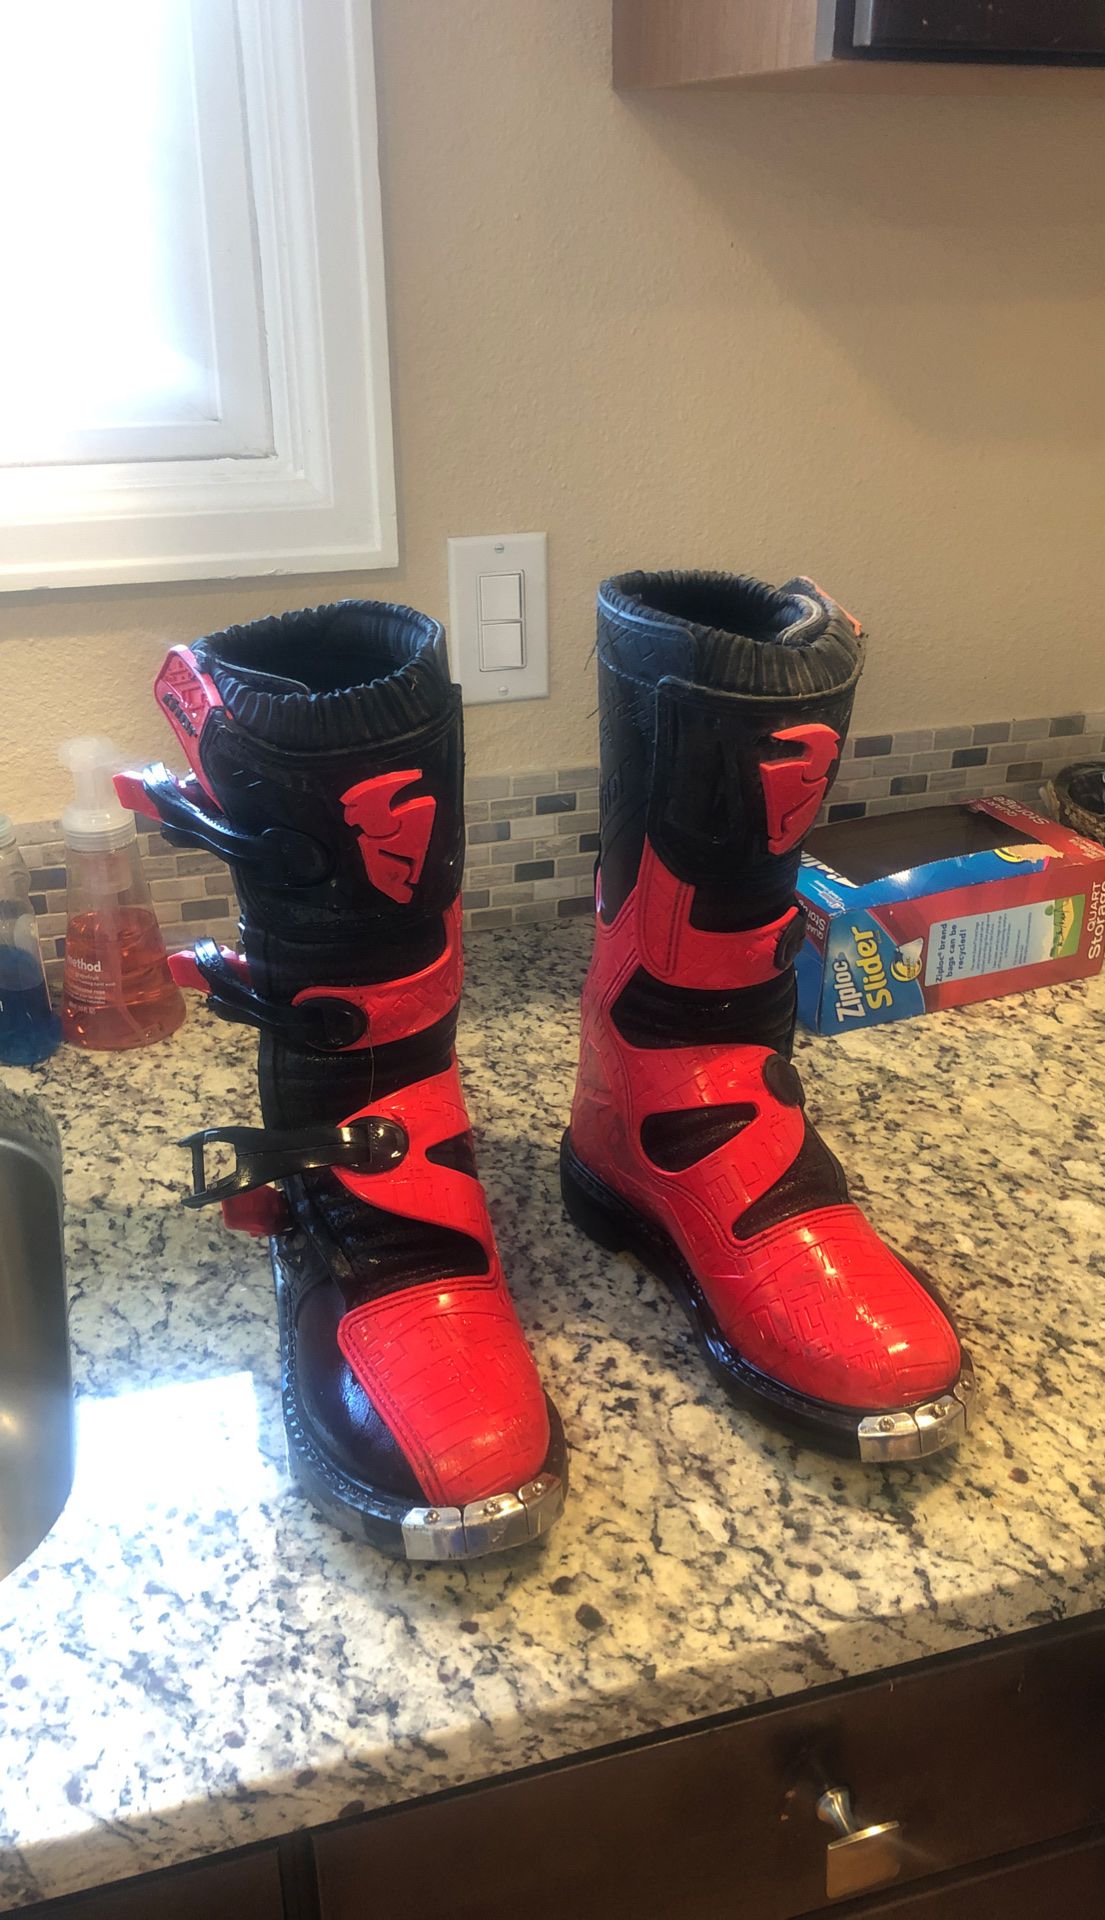 Dirt bike Motorcycle boots